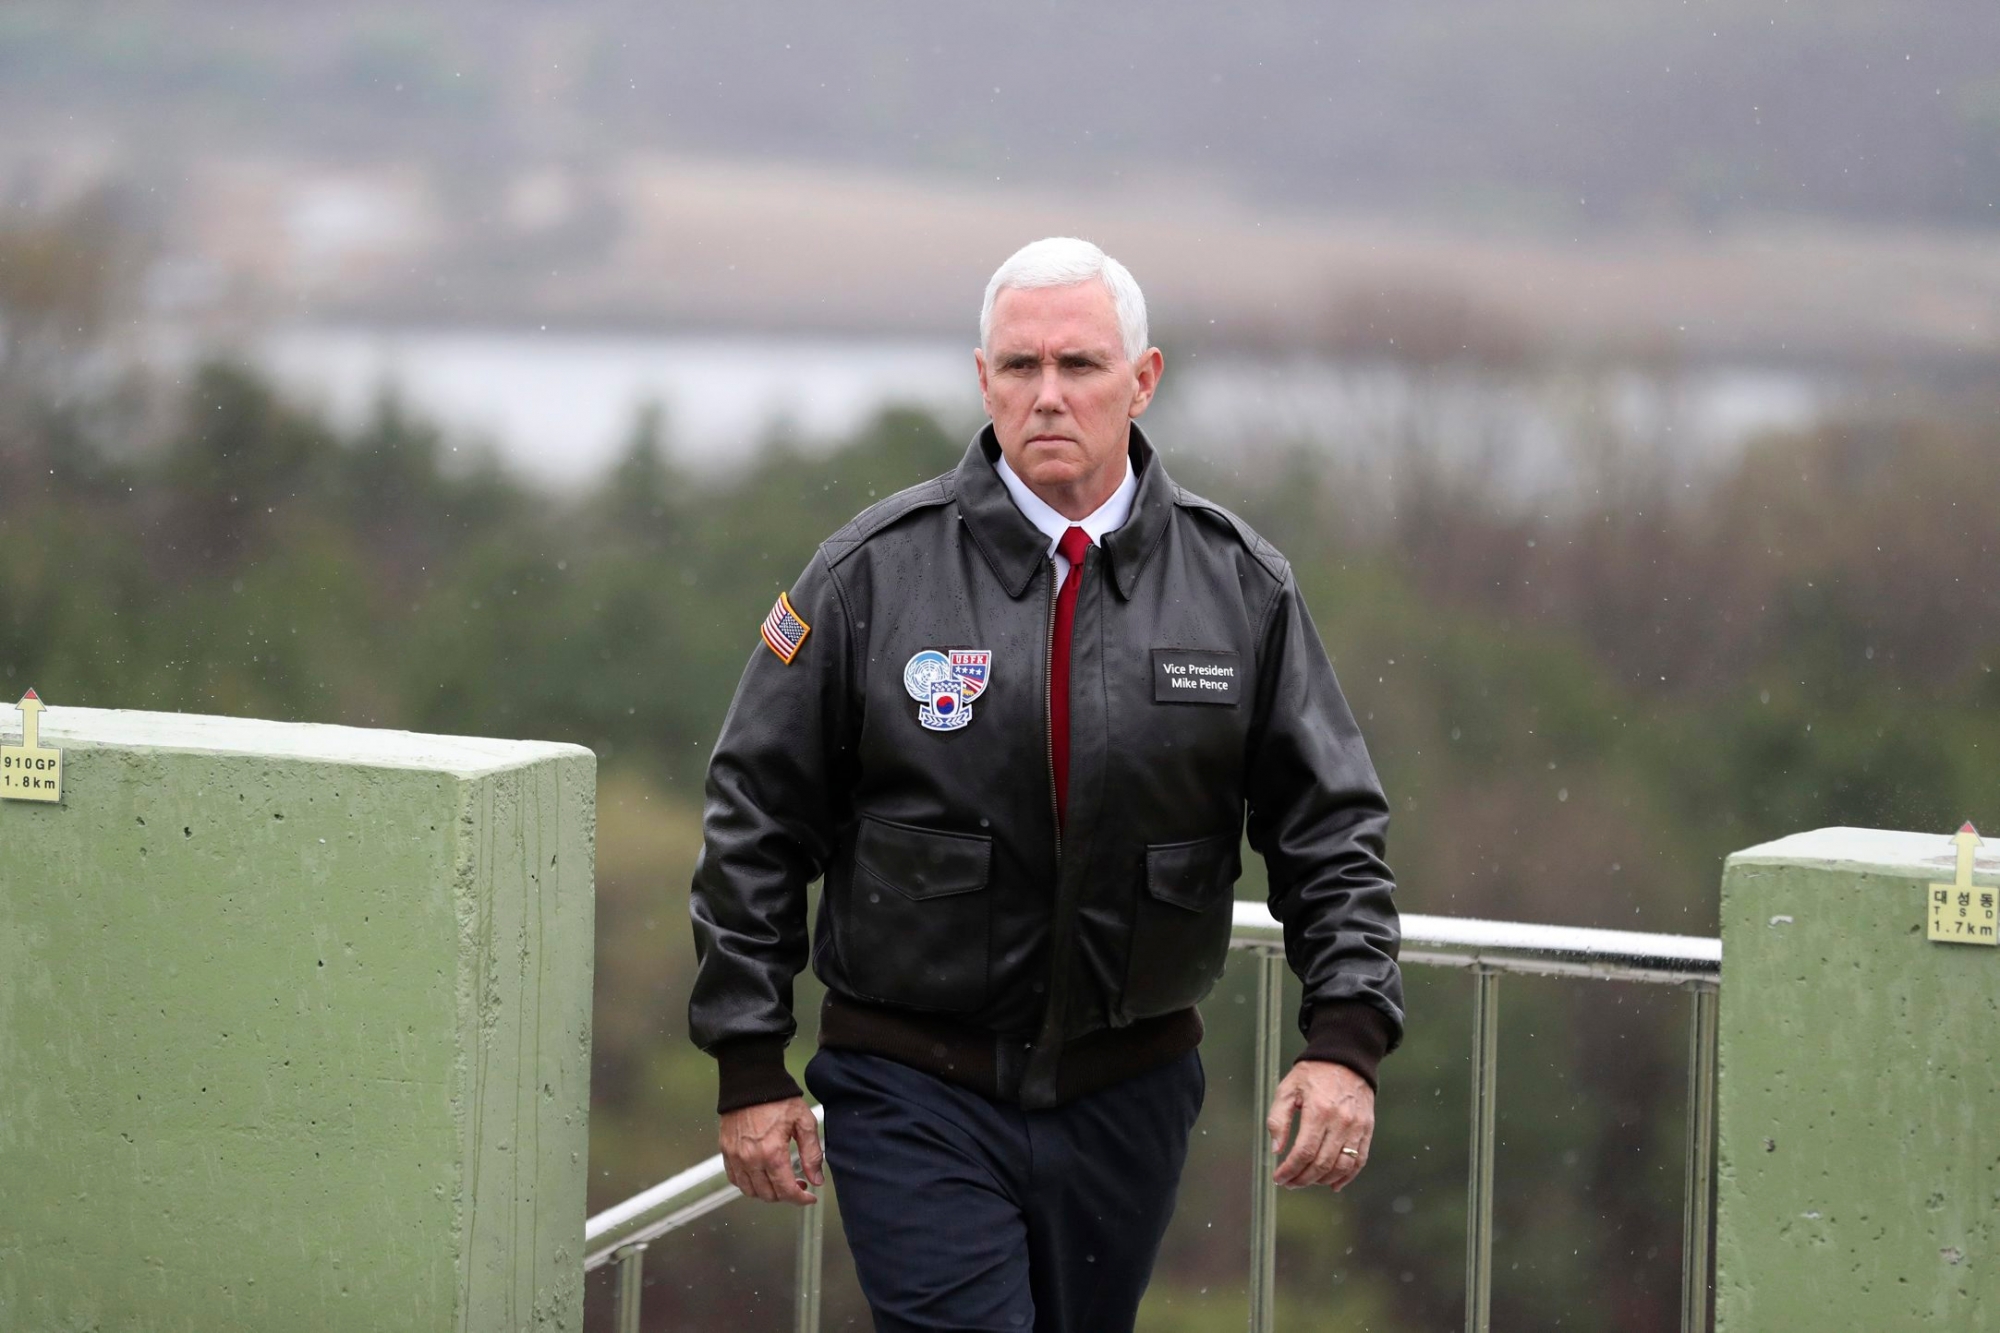 U.S. Vice President Mike Pence arrives at Observation Post Ouellette in the Demilitarized Zone (DMZ), near the border village of Panmunjom, which has separated the two Koreas since the Korean War, South Korea, Monday, April 17, 2017.  Pence says the "era of strategic patience is over" with North Korea, expressing impatience with the willingness of the North Korean regime to move toward ridding itself of nuclear weapons and ballistic missiles. His 10-day tour of Asia comes as tensions grow in the wake of North Korea's latest missile test. (AP Photo/Lee Jin-man) South Korea US Pence Korea